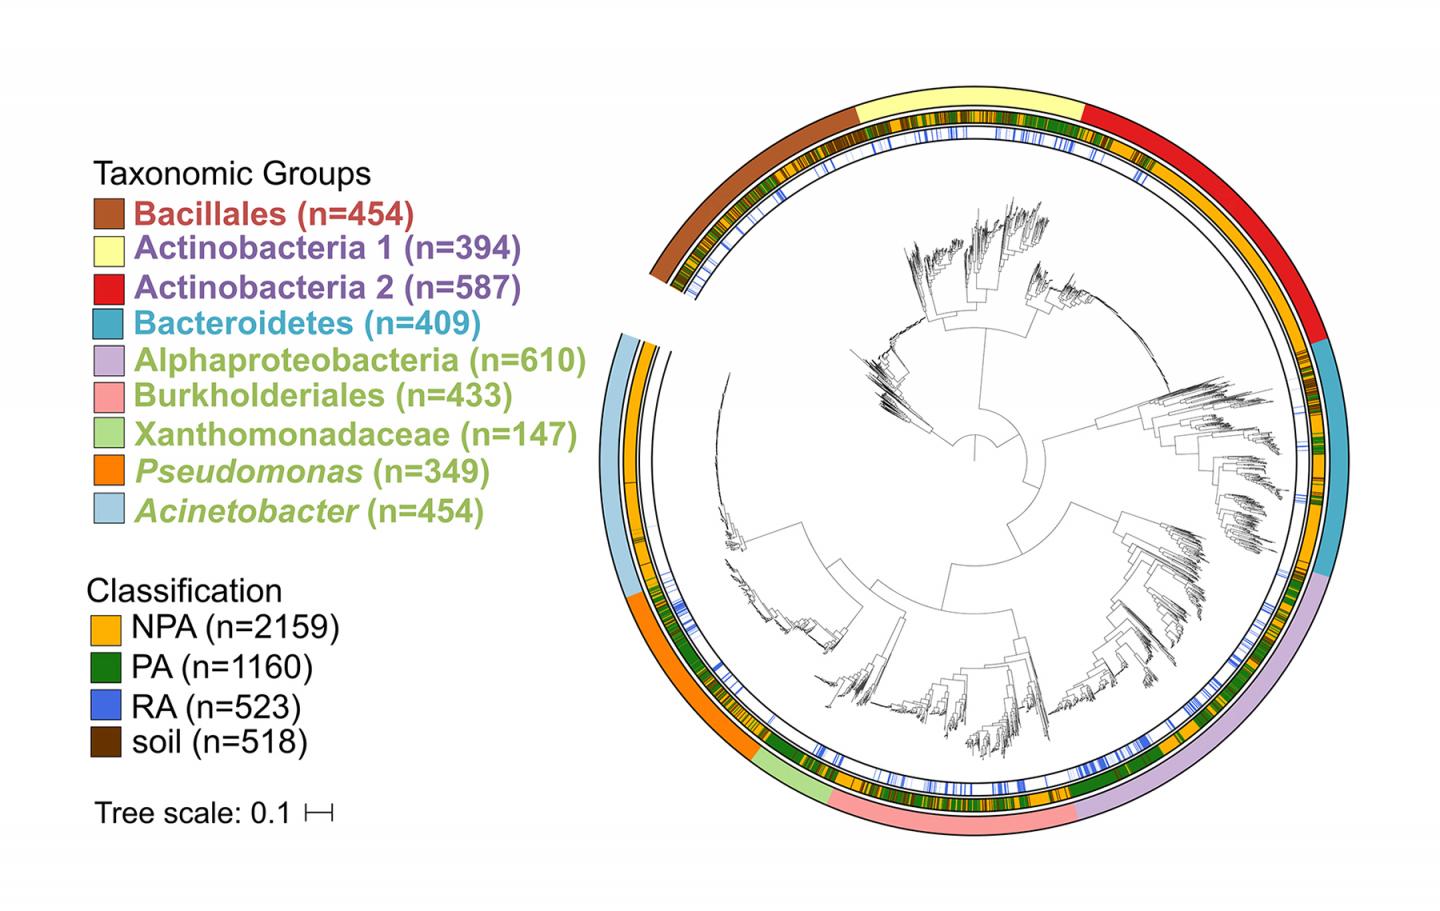 Phylogenetic Tree of Bacterial Genomes Related to a Jgi Nature Genetics Paper